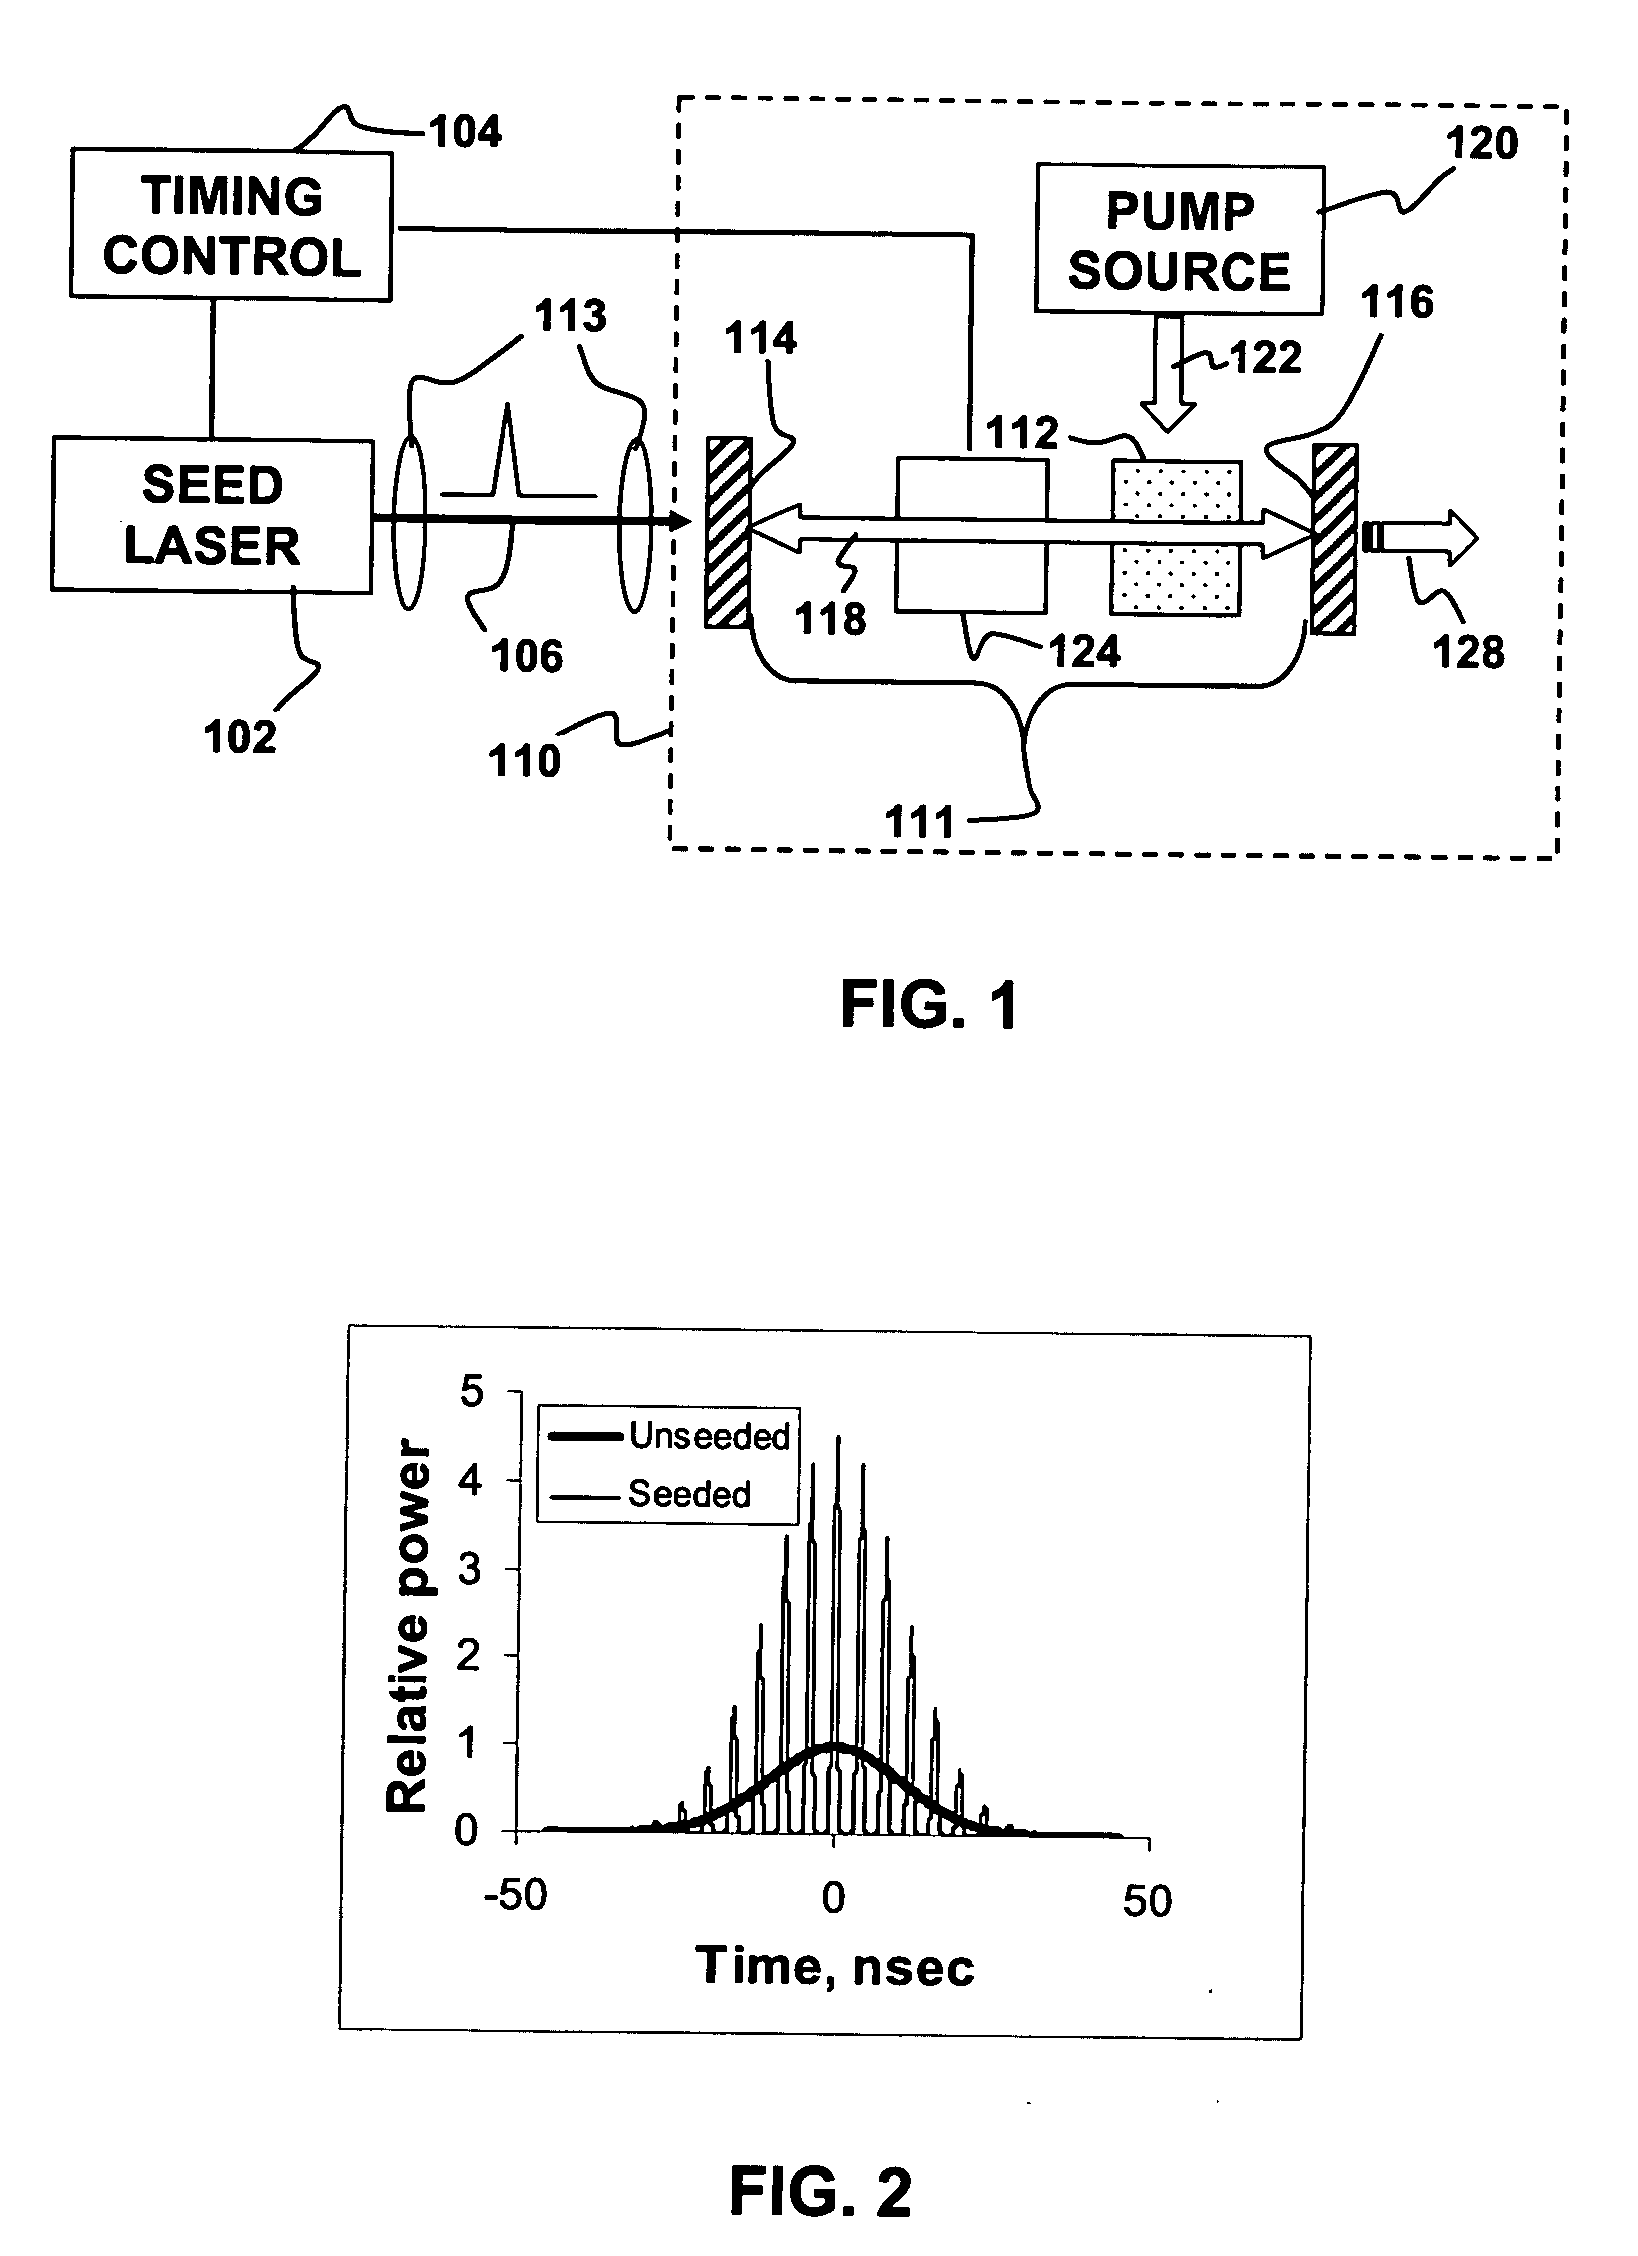 Injection seeding of frequency-converted Q-switched laser